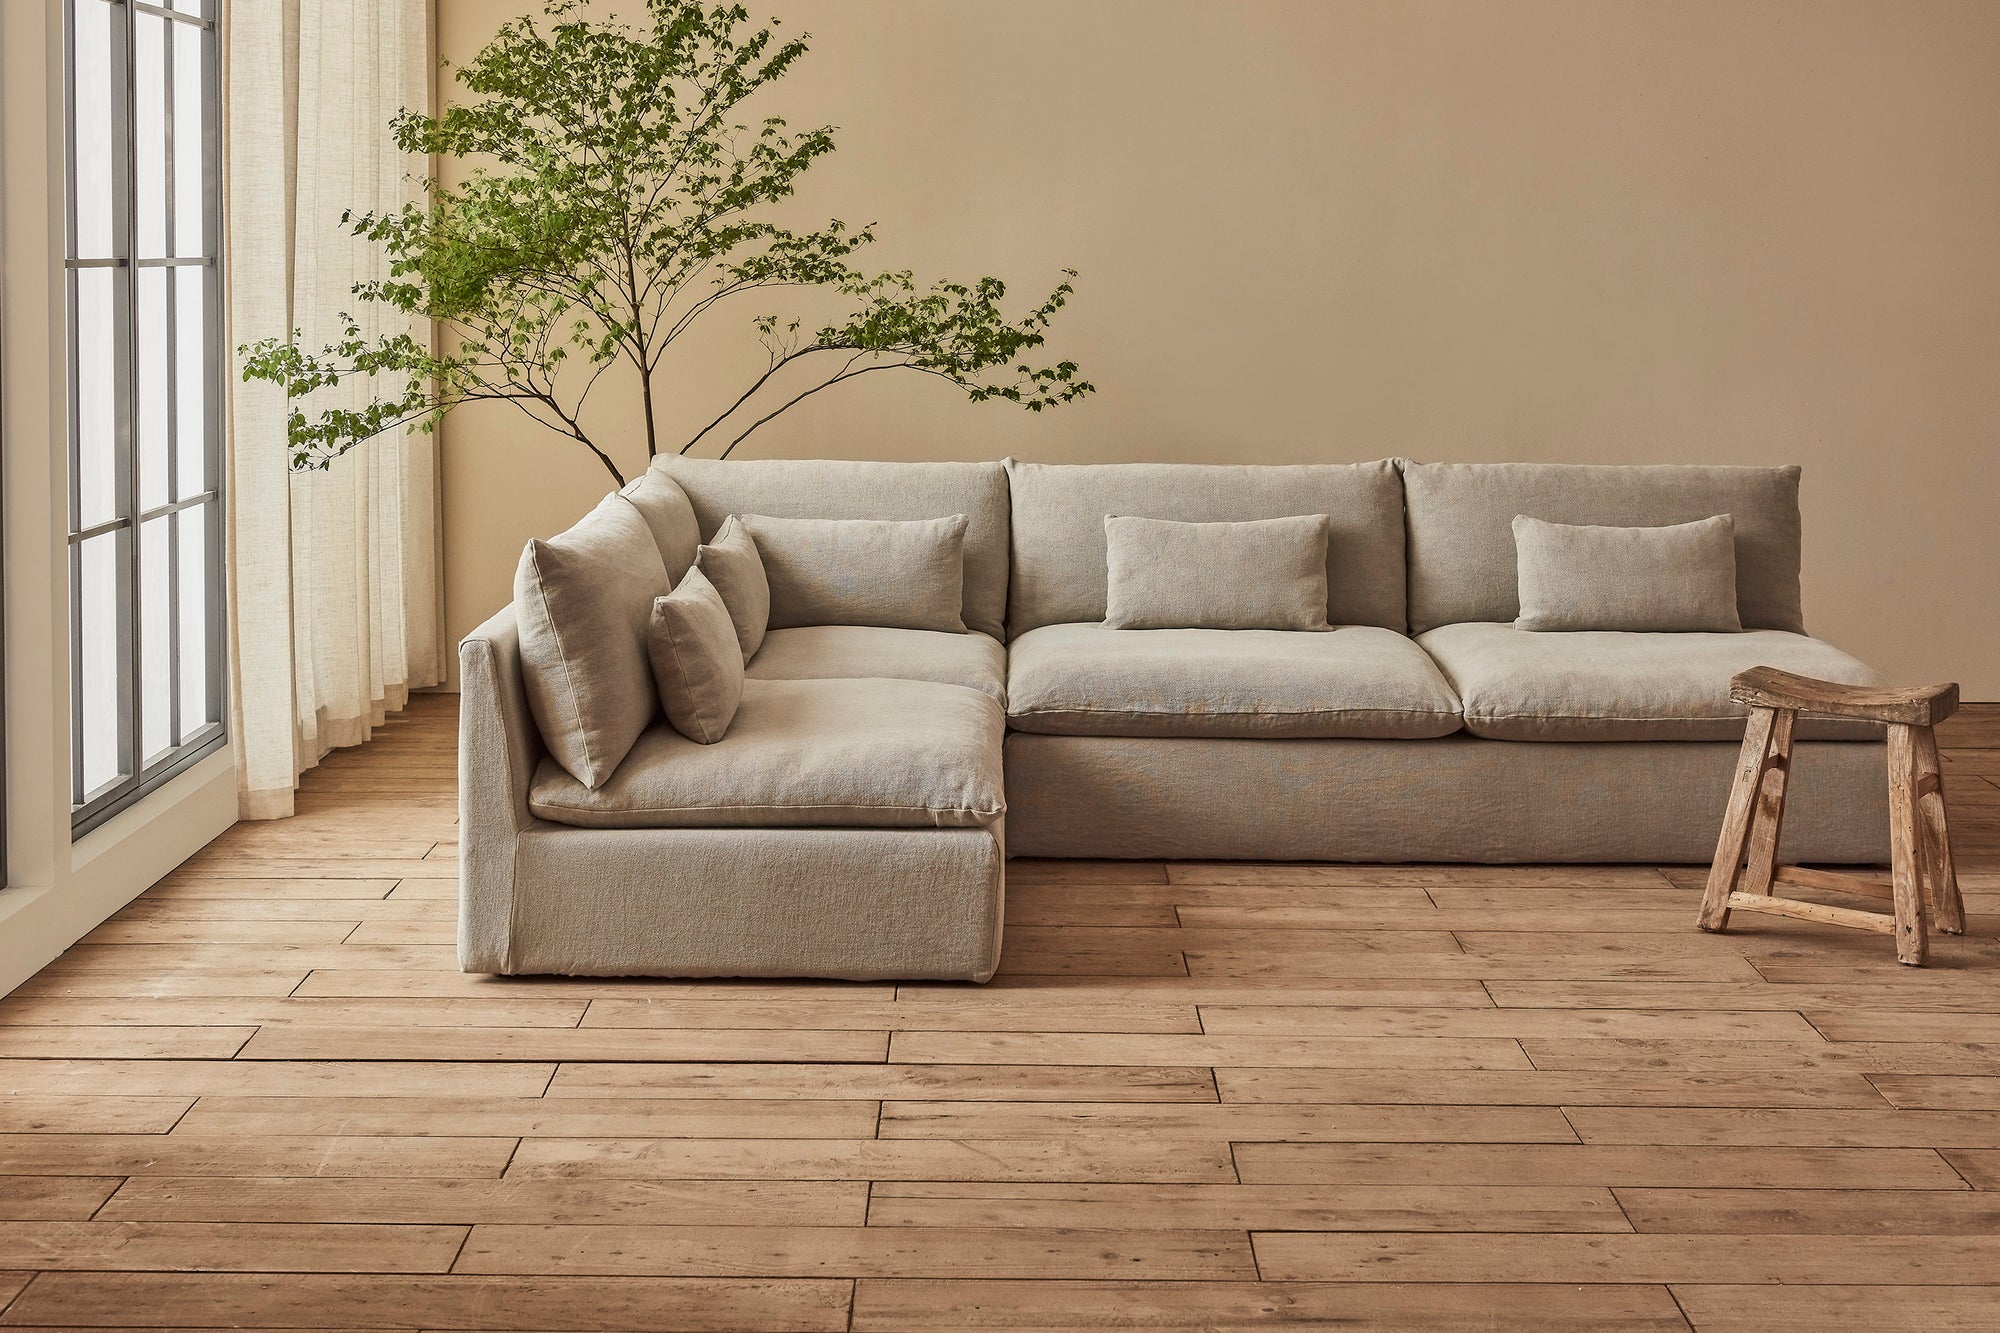 Aria Long L-Shape Sectional Sofa in Jasmine Rice, a light warm greige Medium Weight Linen, placed in a sunlit room between a potted tree and a stool